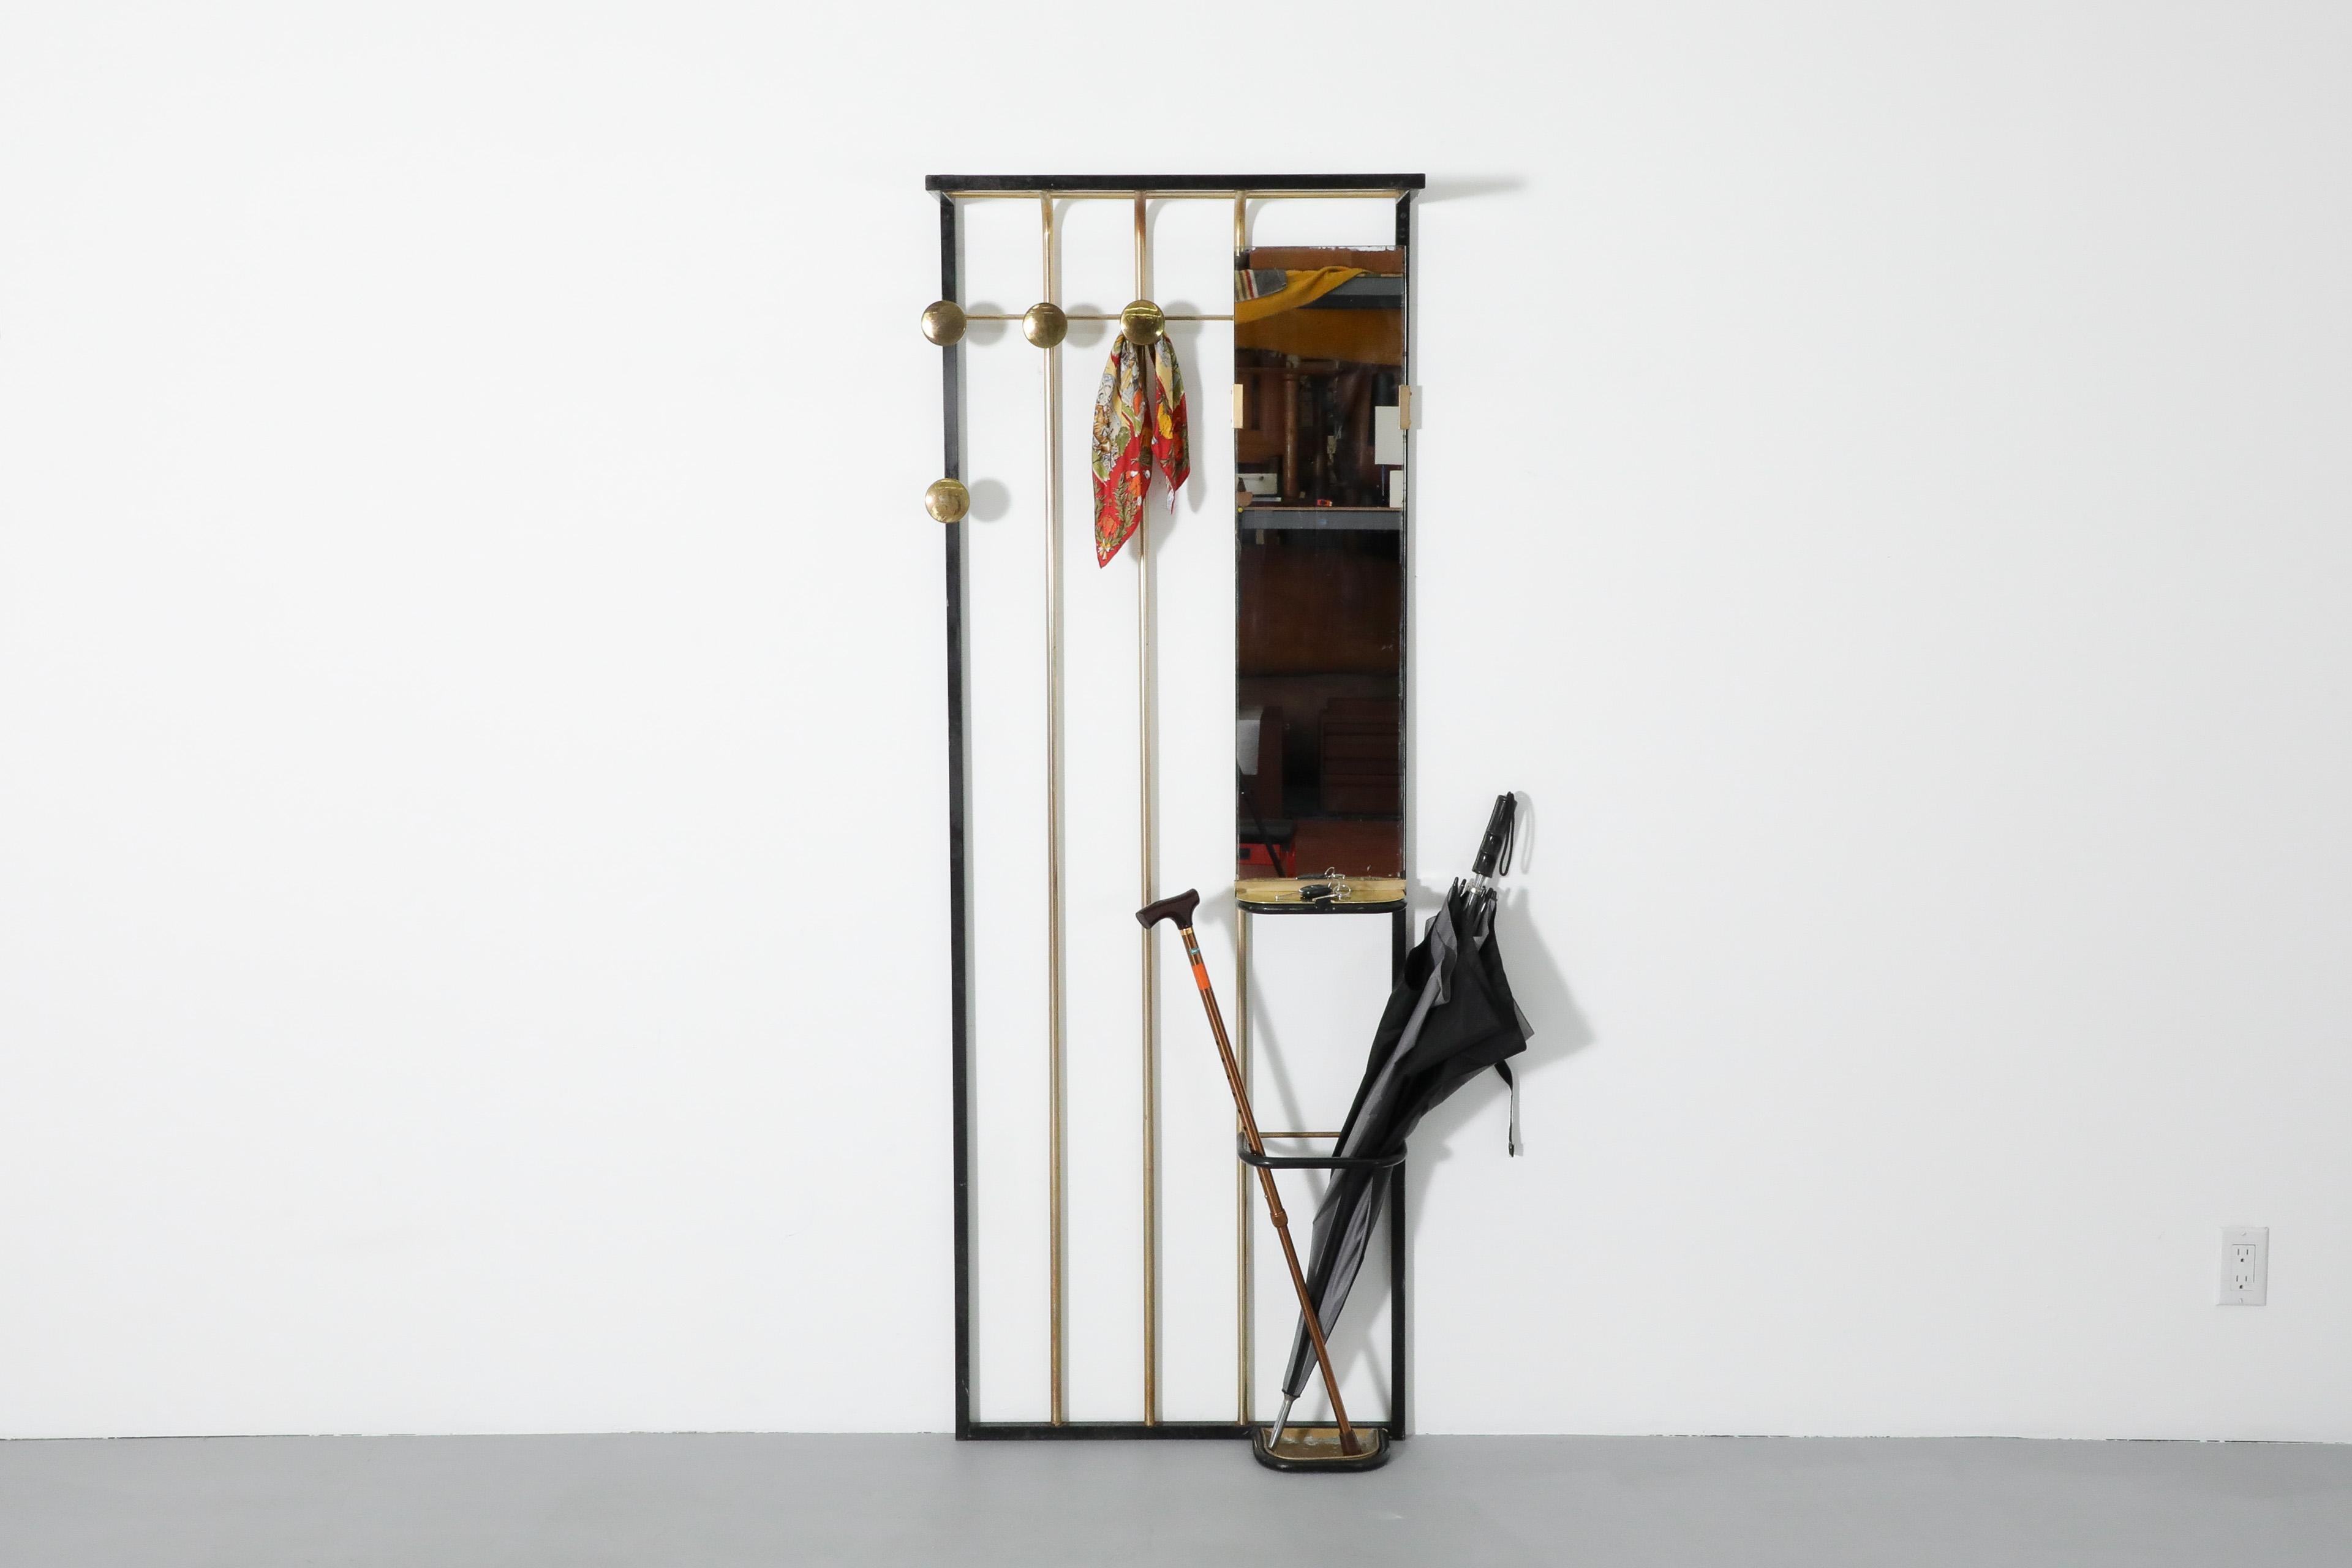 Elegantly designed, French Mid-Century, brass and black enameled metal, wall mounted coat rack. Outfitted with a mirror, brass coat hooks, an attached umbrella stand and a (newly made) custom brass key shelf this is not only a beautiful piece but a